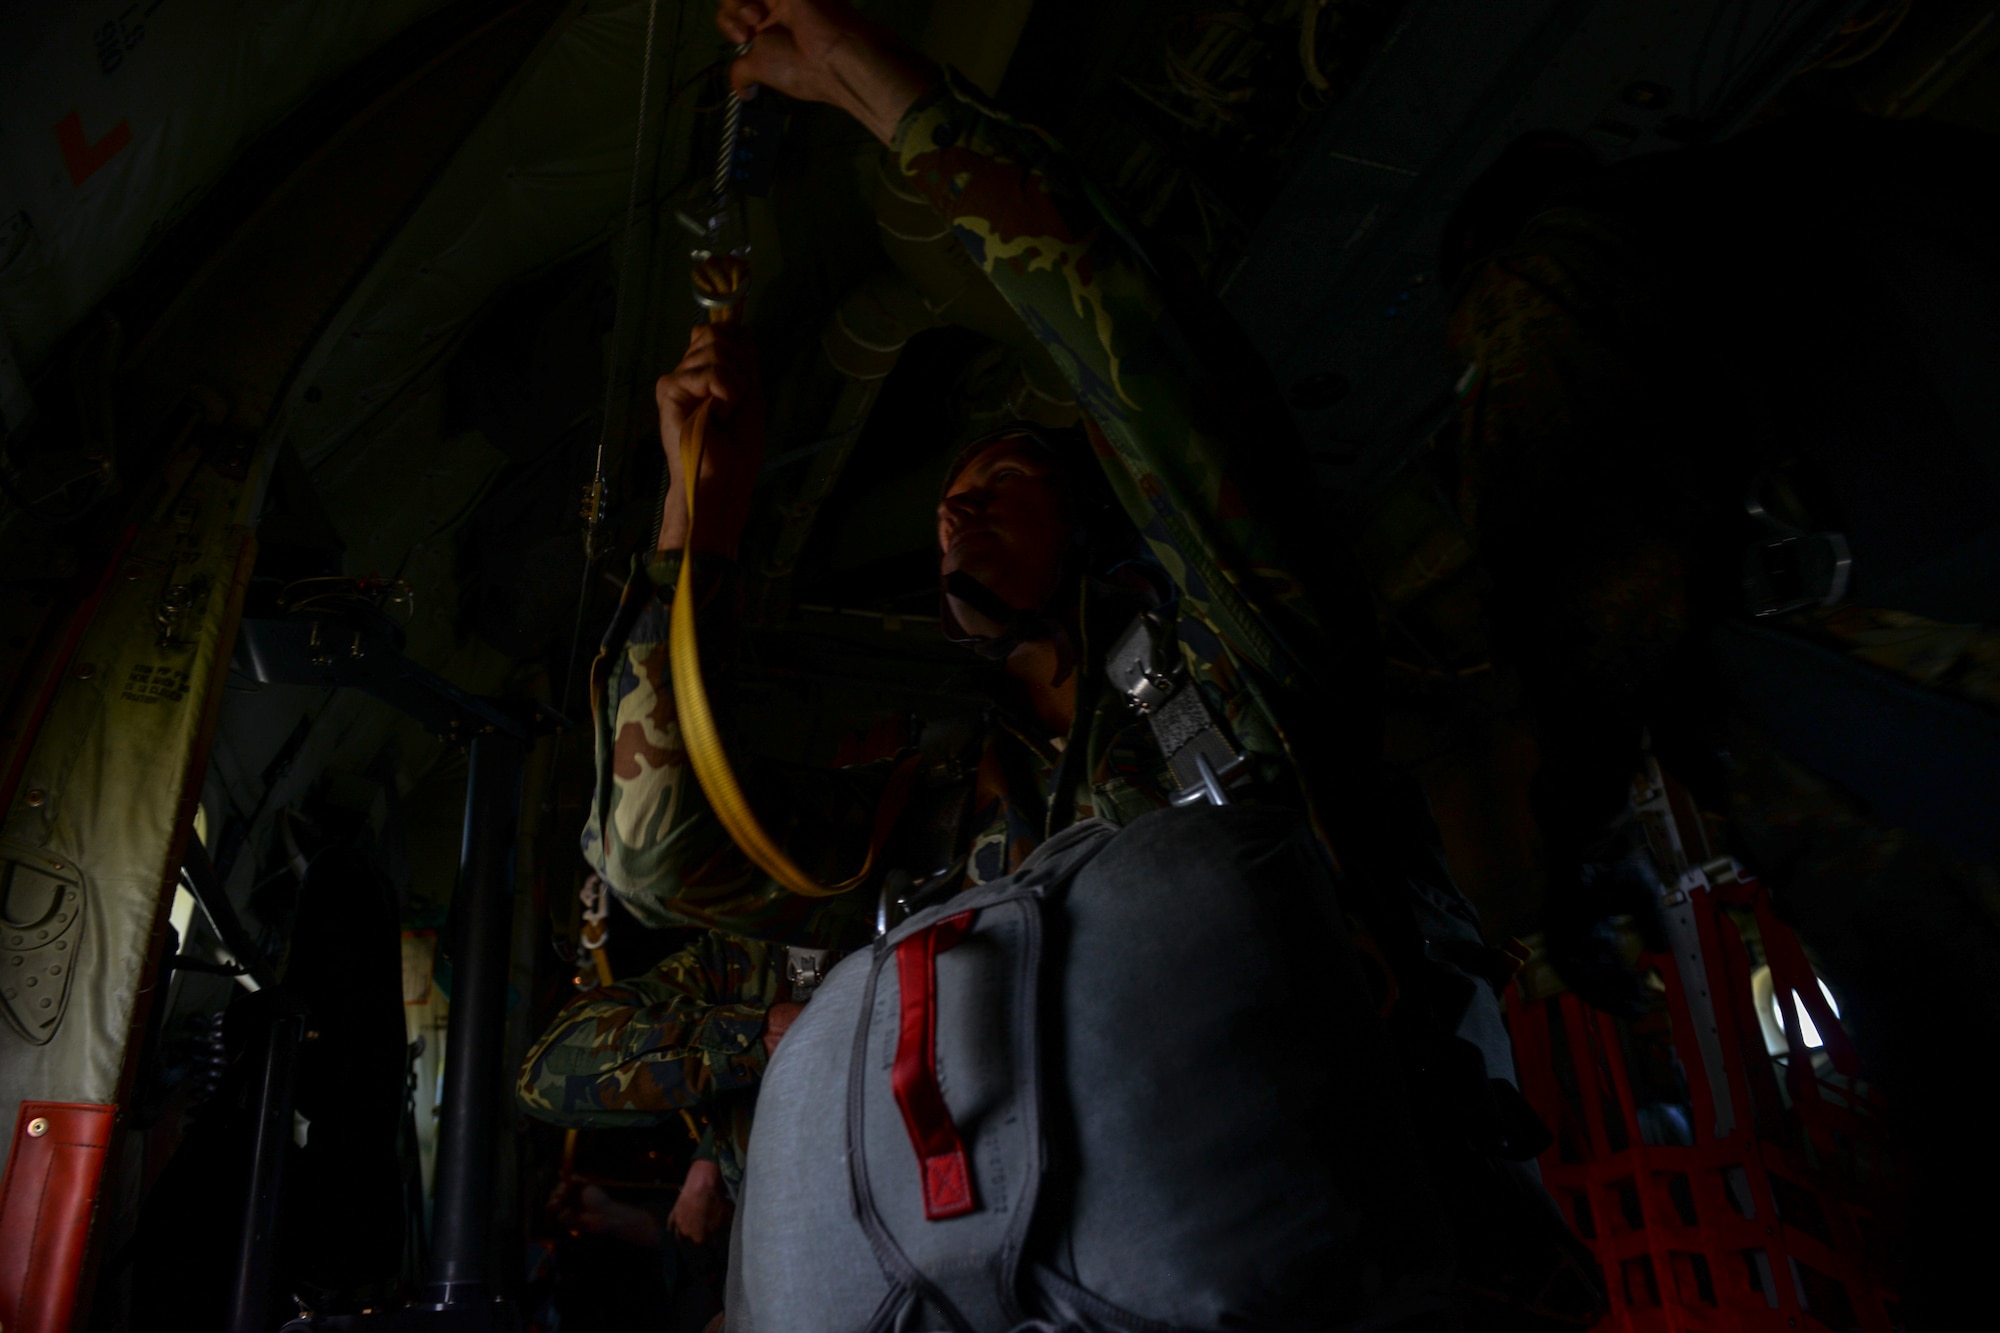 A Bulgarian jumper hooks onto a static line inside a U.S. Air Force C-130J Super Hercules aircraft over Plovdiv, Bulgaria, July 14, 2018. During Thracian Summer 2018, U.S. and Bulgarian forces trained both static-line jumps and free falls. (U.S. Air Force photo by Staff Sgt. Jimmie D. Pike)